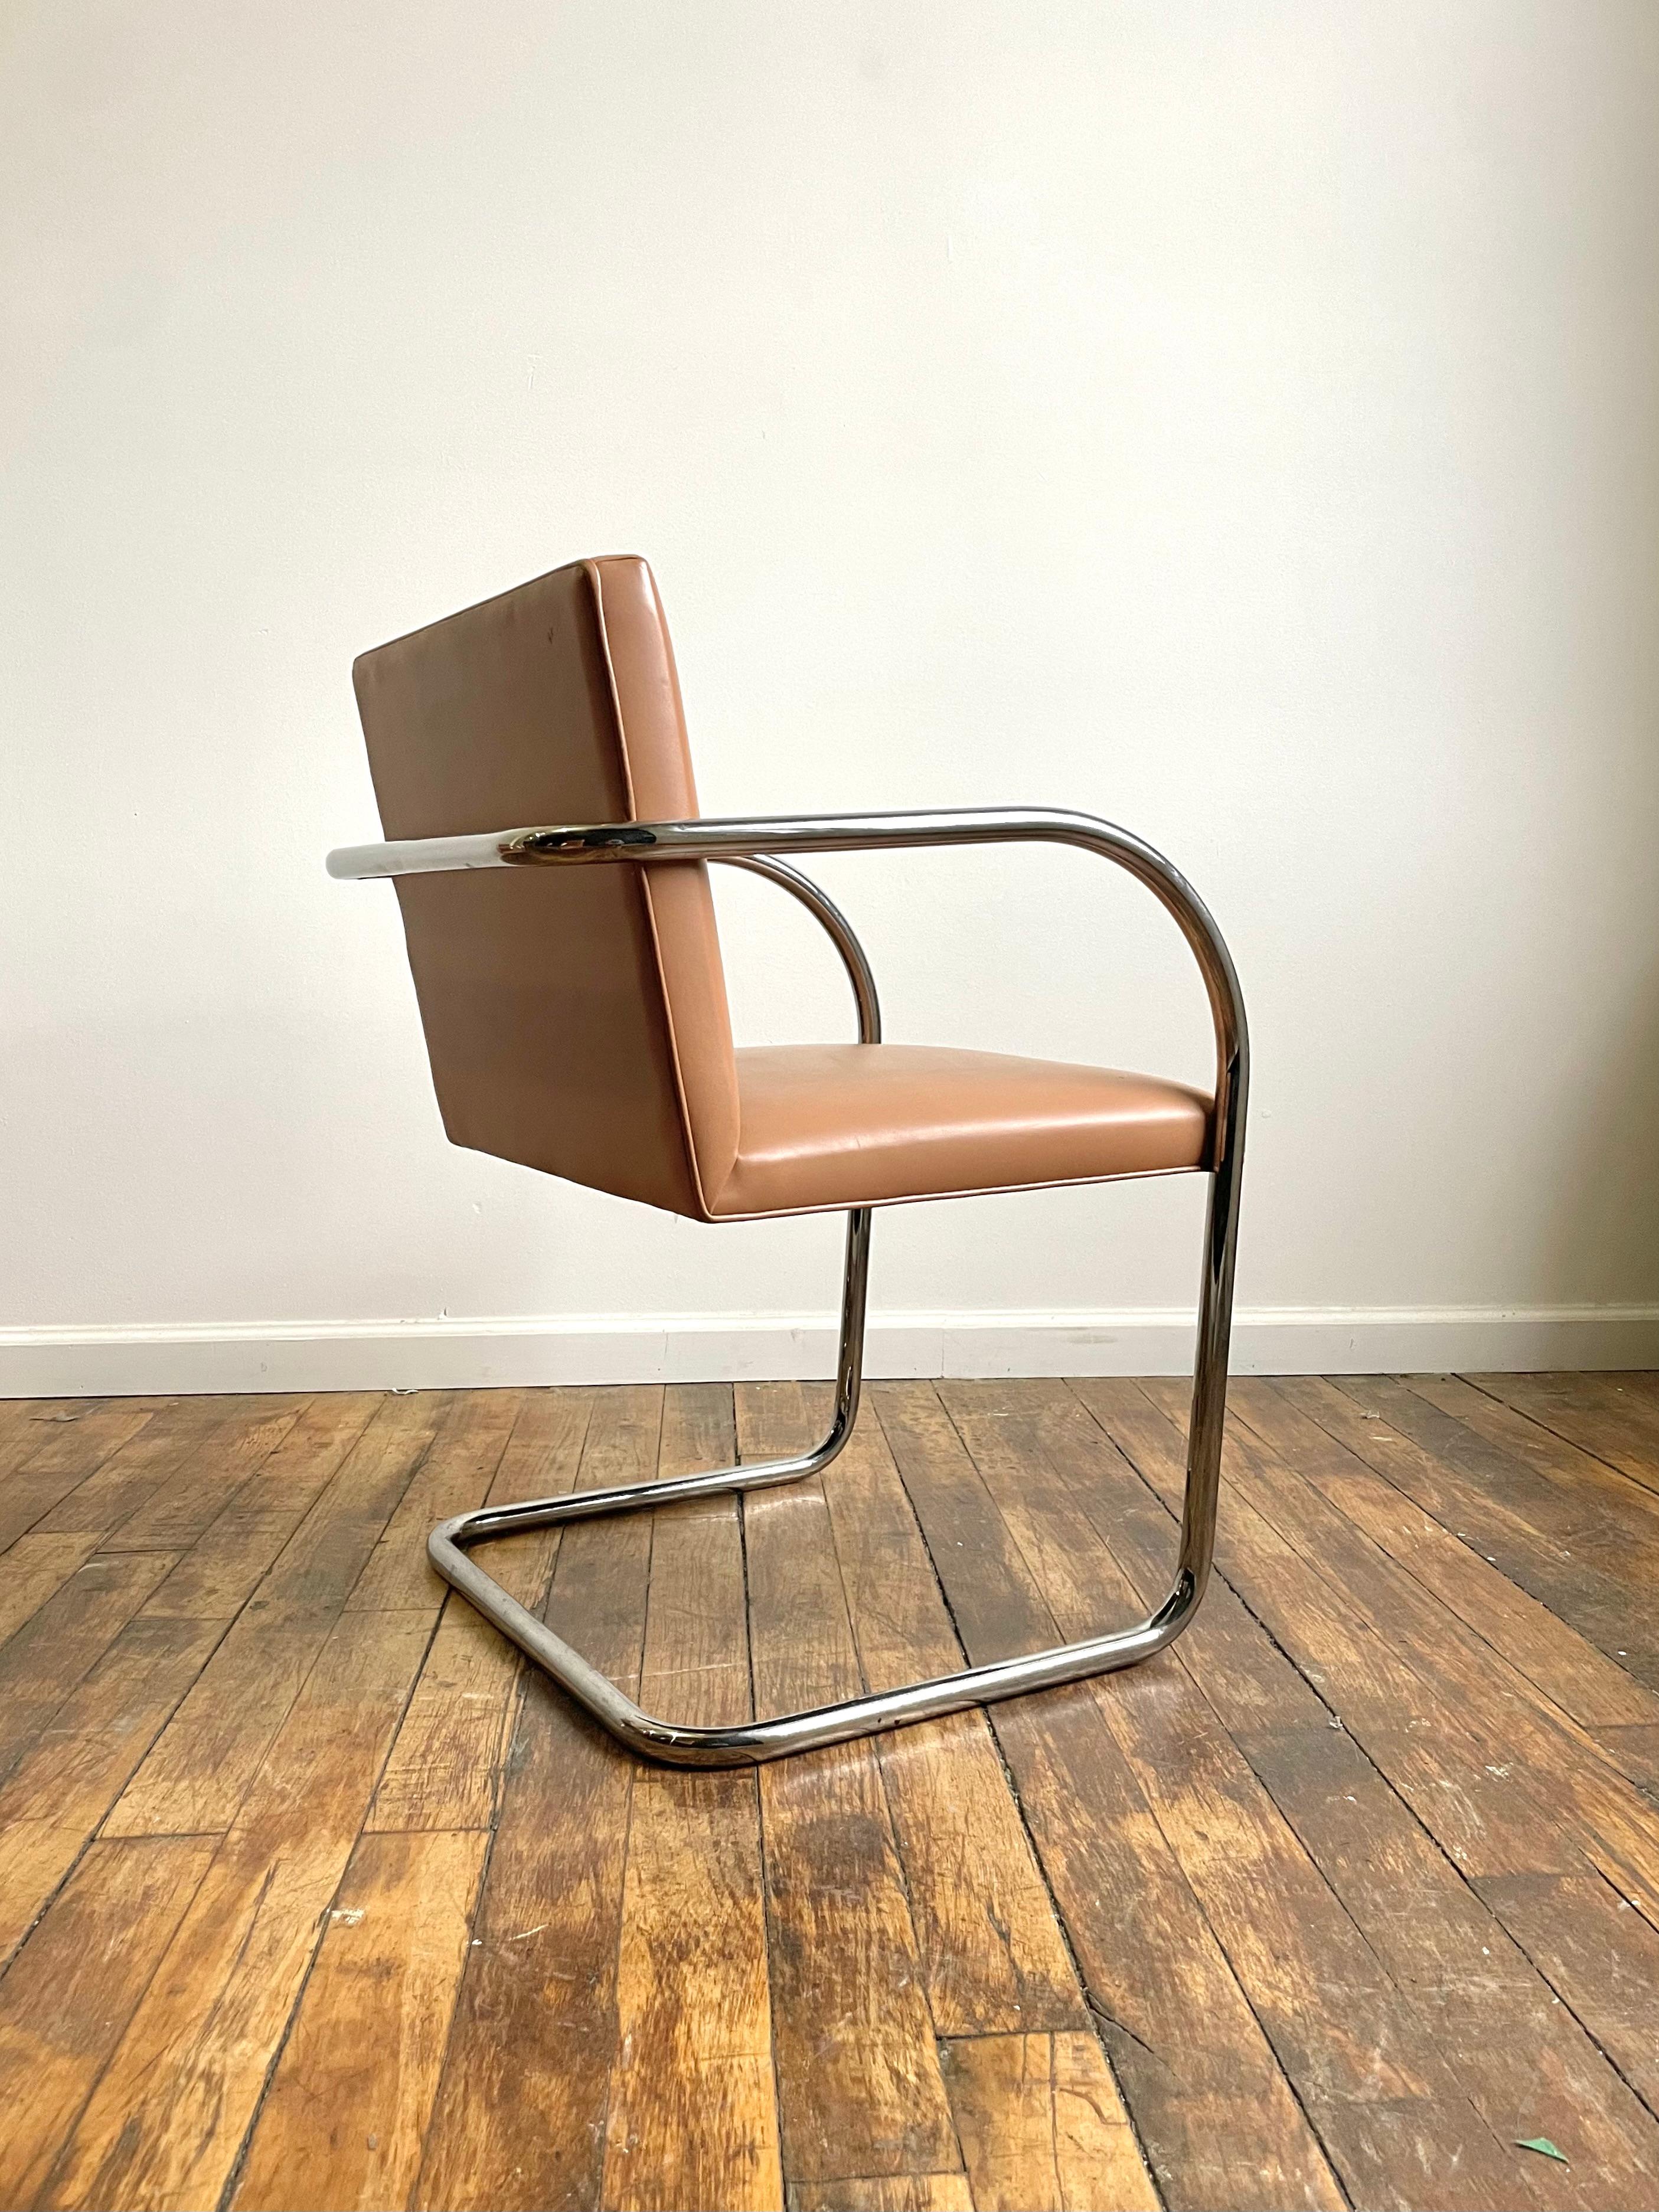 Presenting a set of 8 Knoll BRNO tubular chairs in camel leather. Likely from the late 90s based on the label. 

Current retail price would be over $25,000 for this set. 

The chairs are an iconic modern design from the 1930s that are consistently